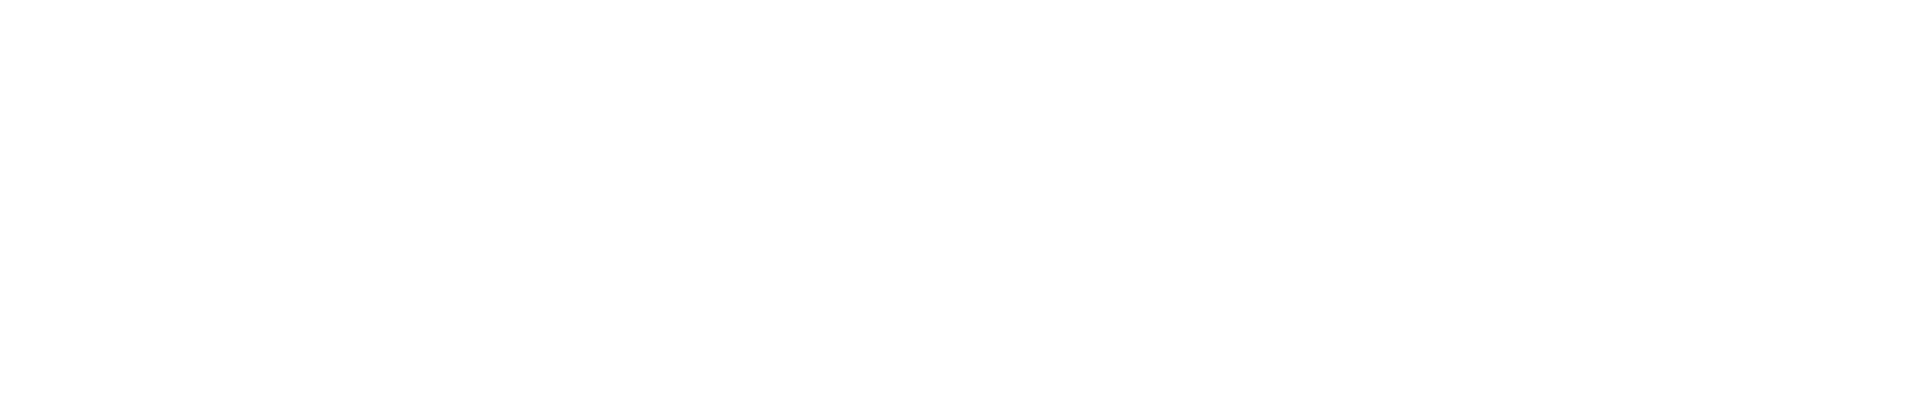 how your church can best serve your community during an economic downturn